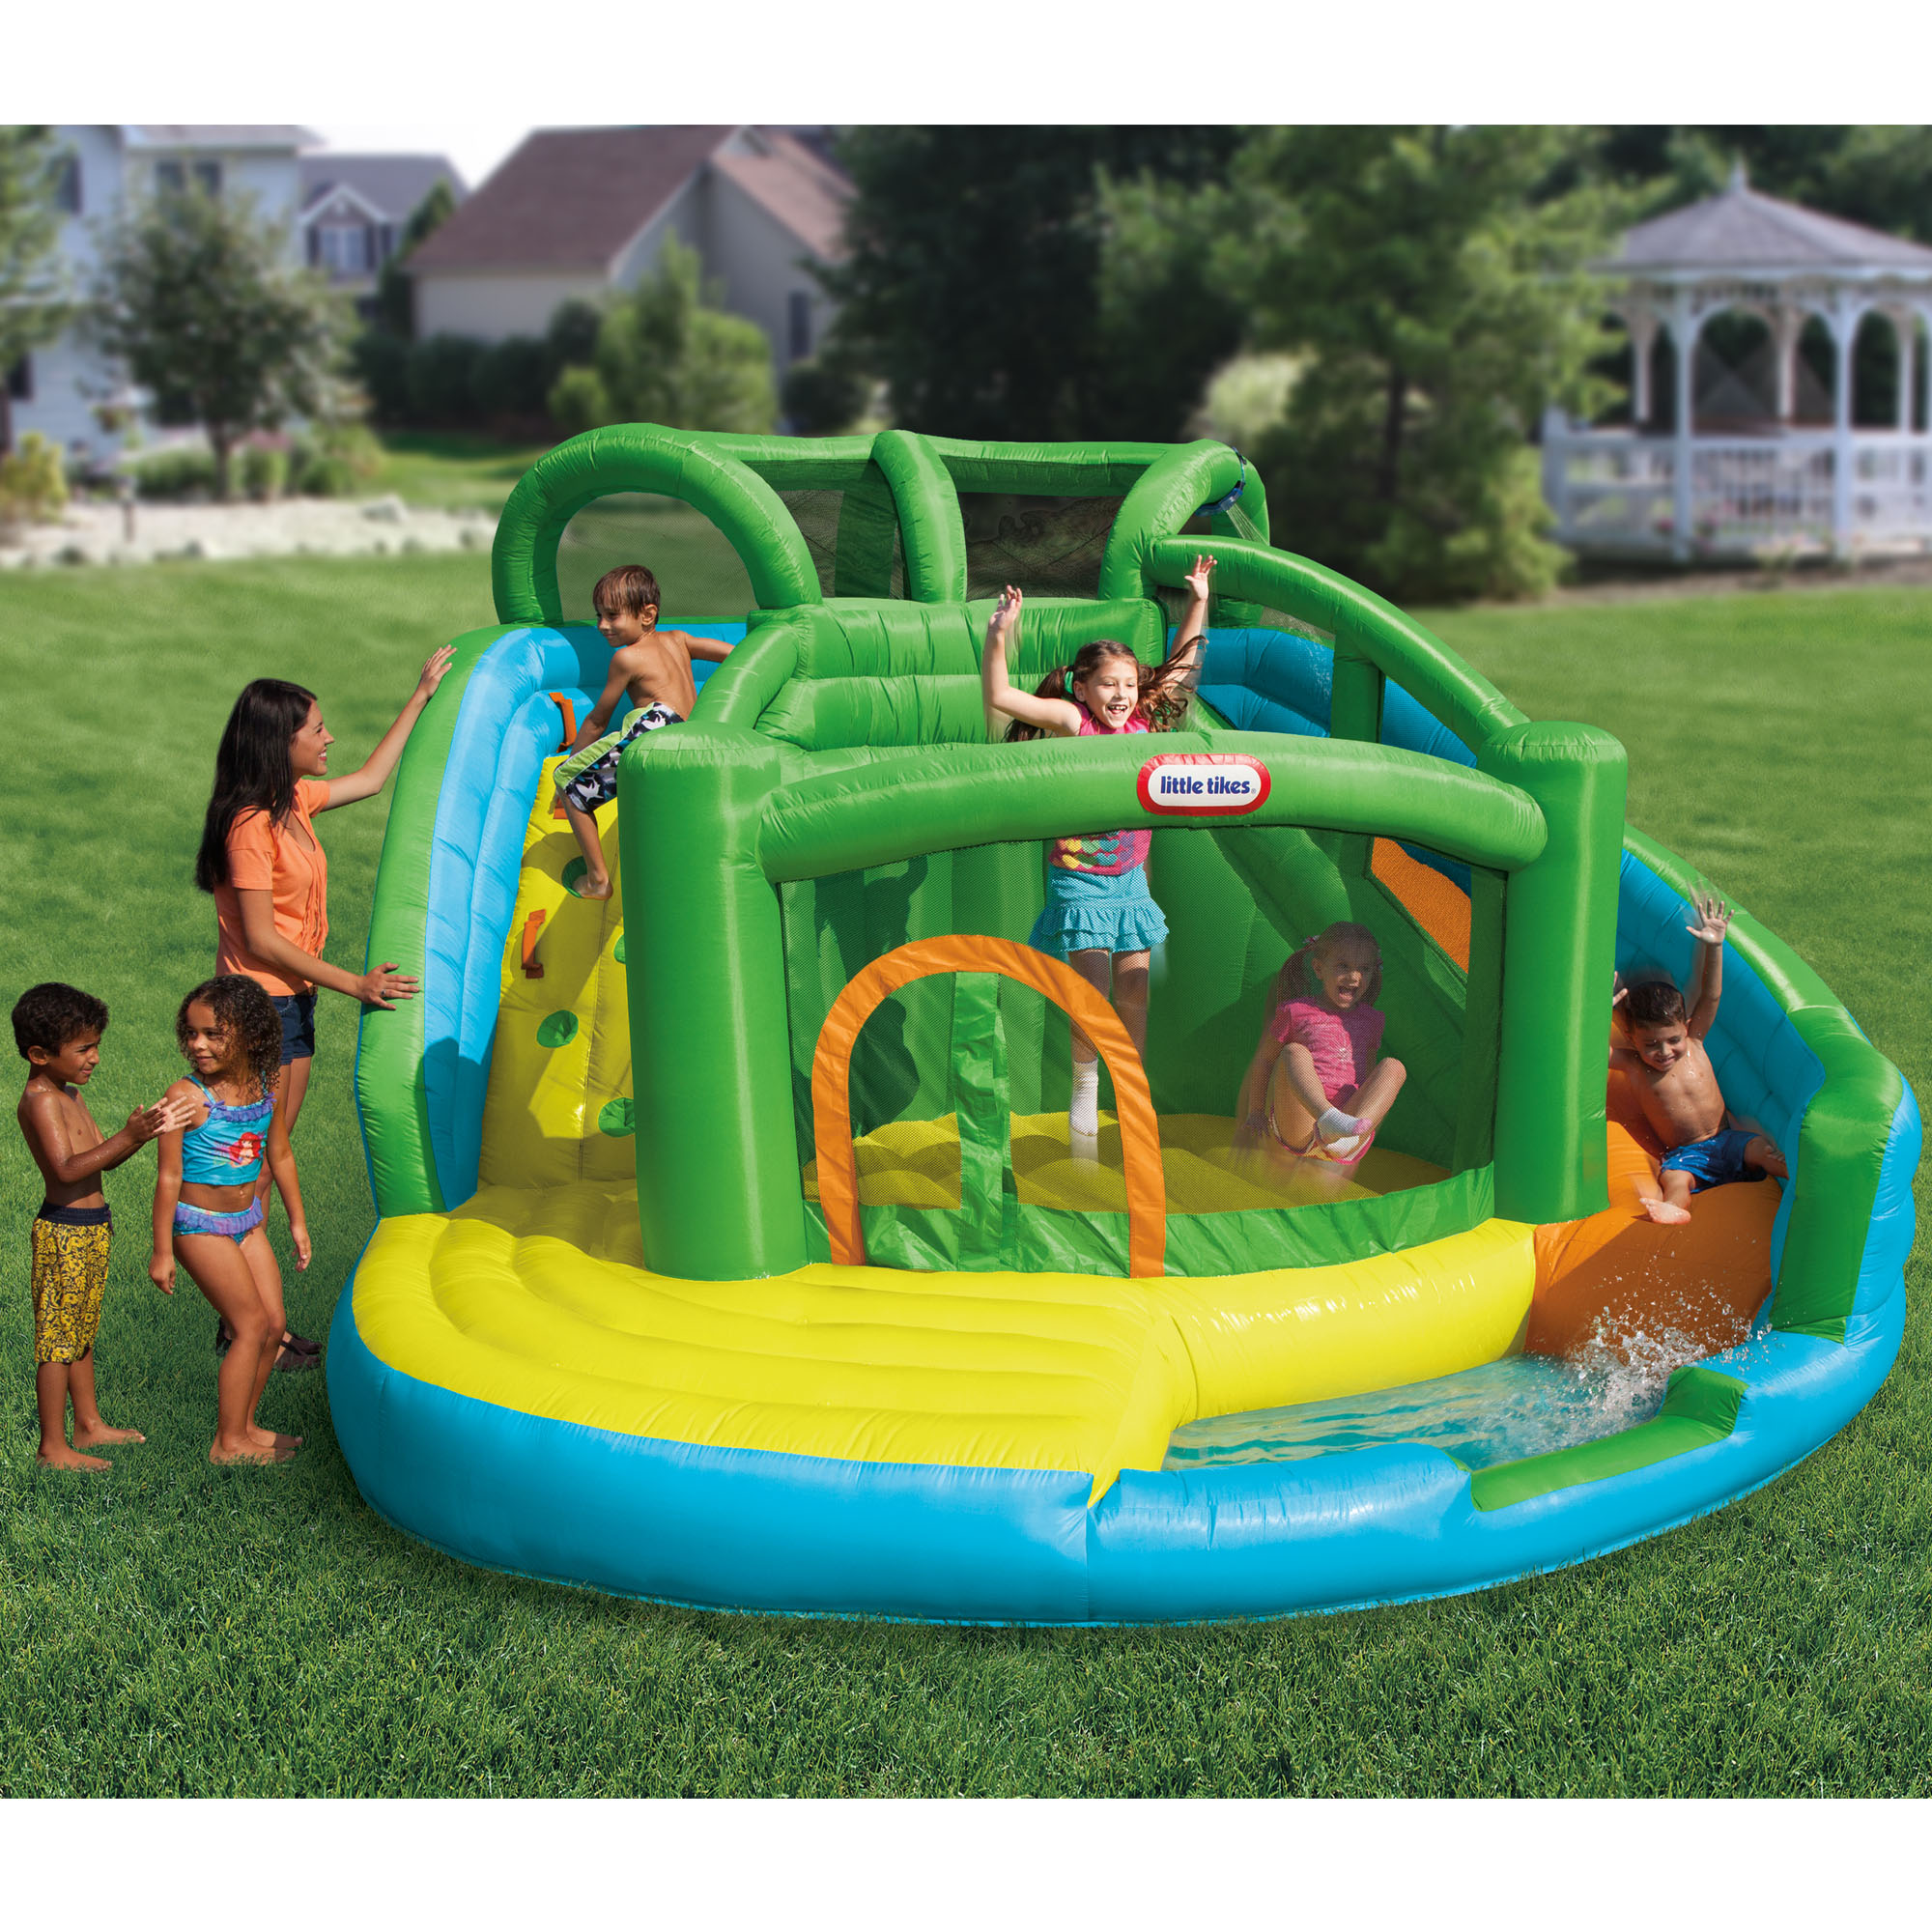 Little Tikes 2-in-1 Wet 'n Dry Inflatable Water Park with 2 Water Slides and Bounce House Including Blower, Kids Outdoor Backyard Playground Toy, Fits up to 4 Kids, Boys Girls Ages 3 4 5+ - image 4 of 6